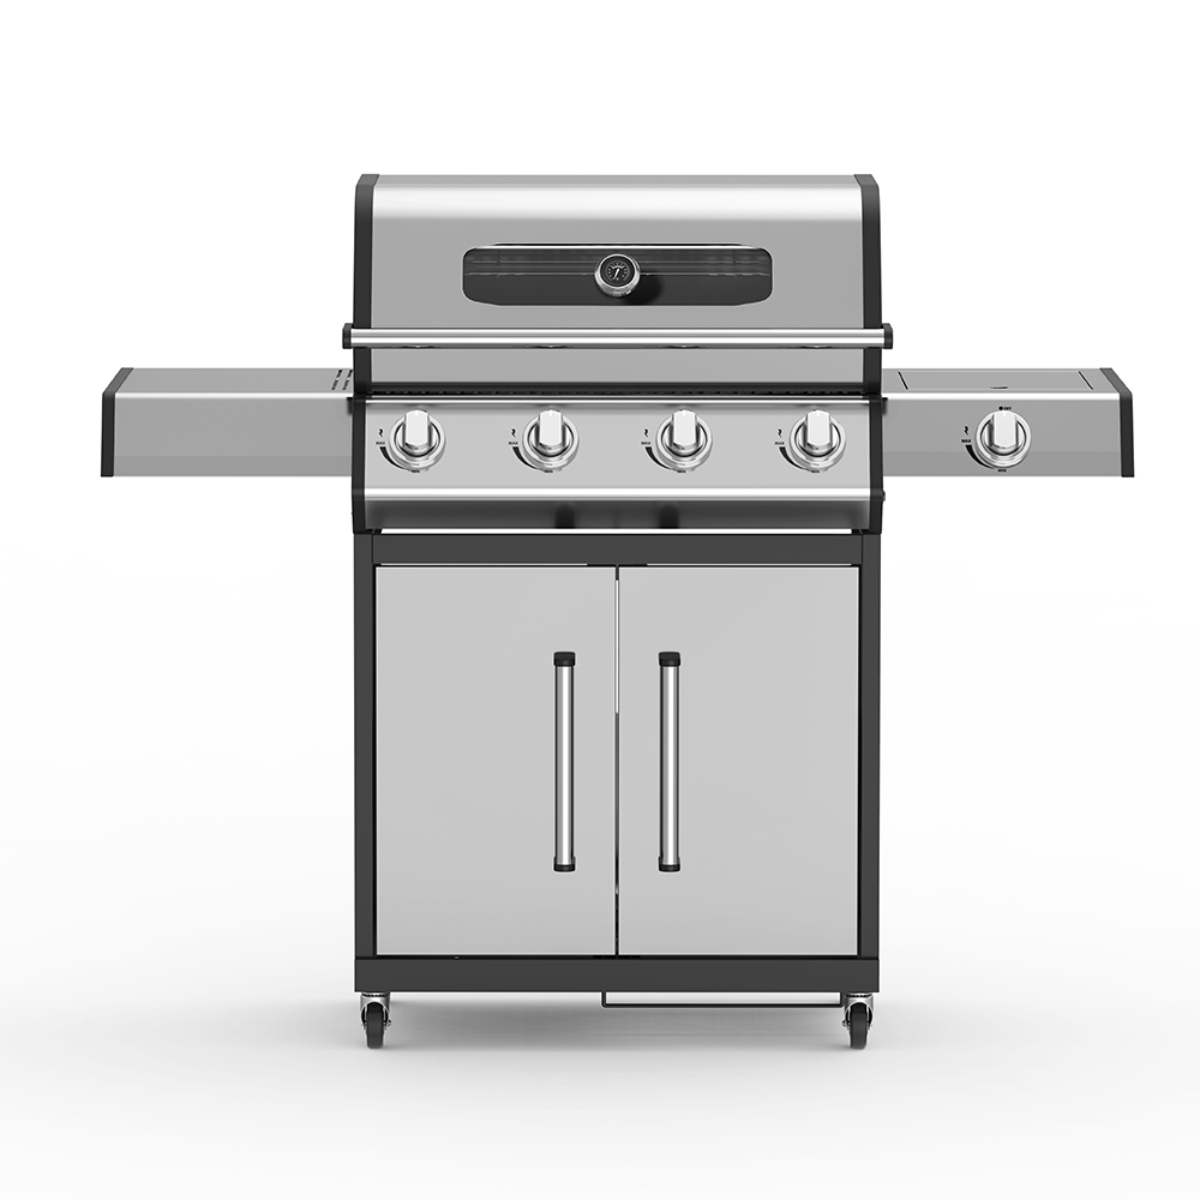 EQBA14B-2 GAS GRILL BBQ-4 +1 STAINLESS STEEL GAS GRILL WITH SIDE BURNER WITH VIEW LID